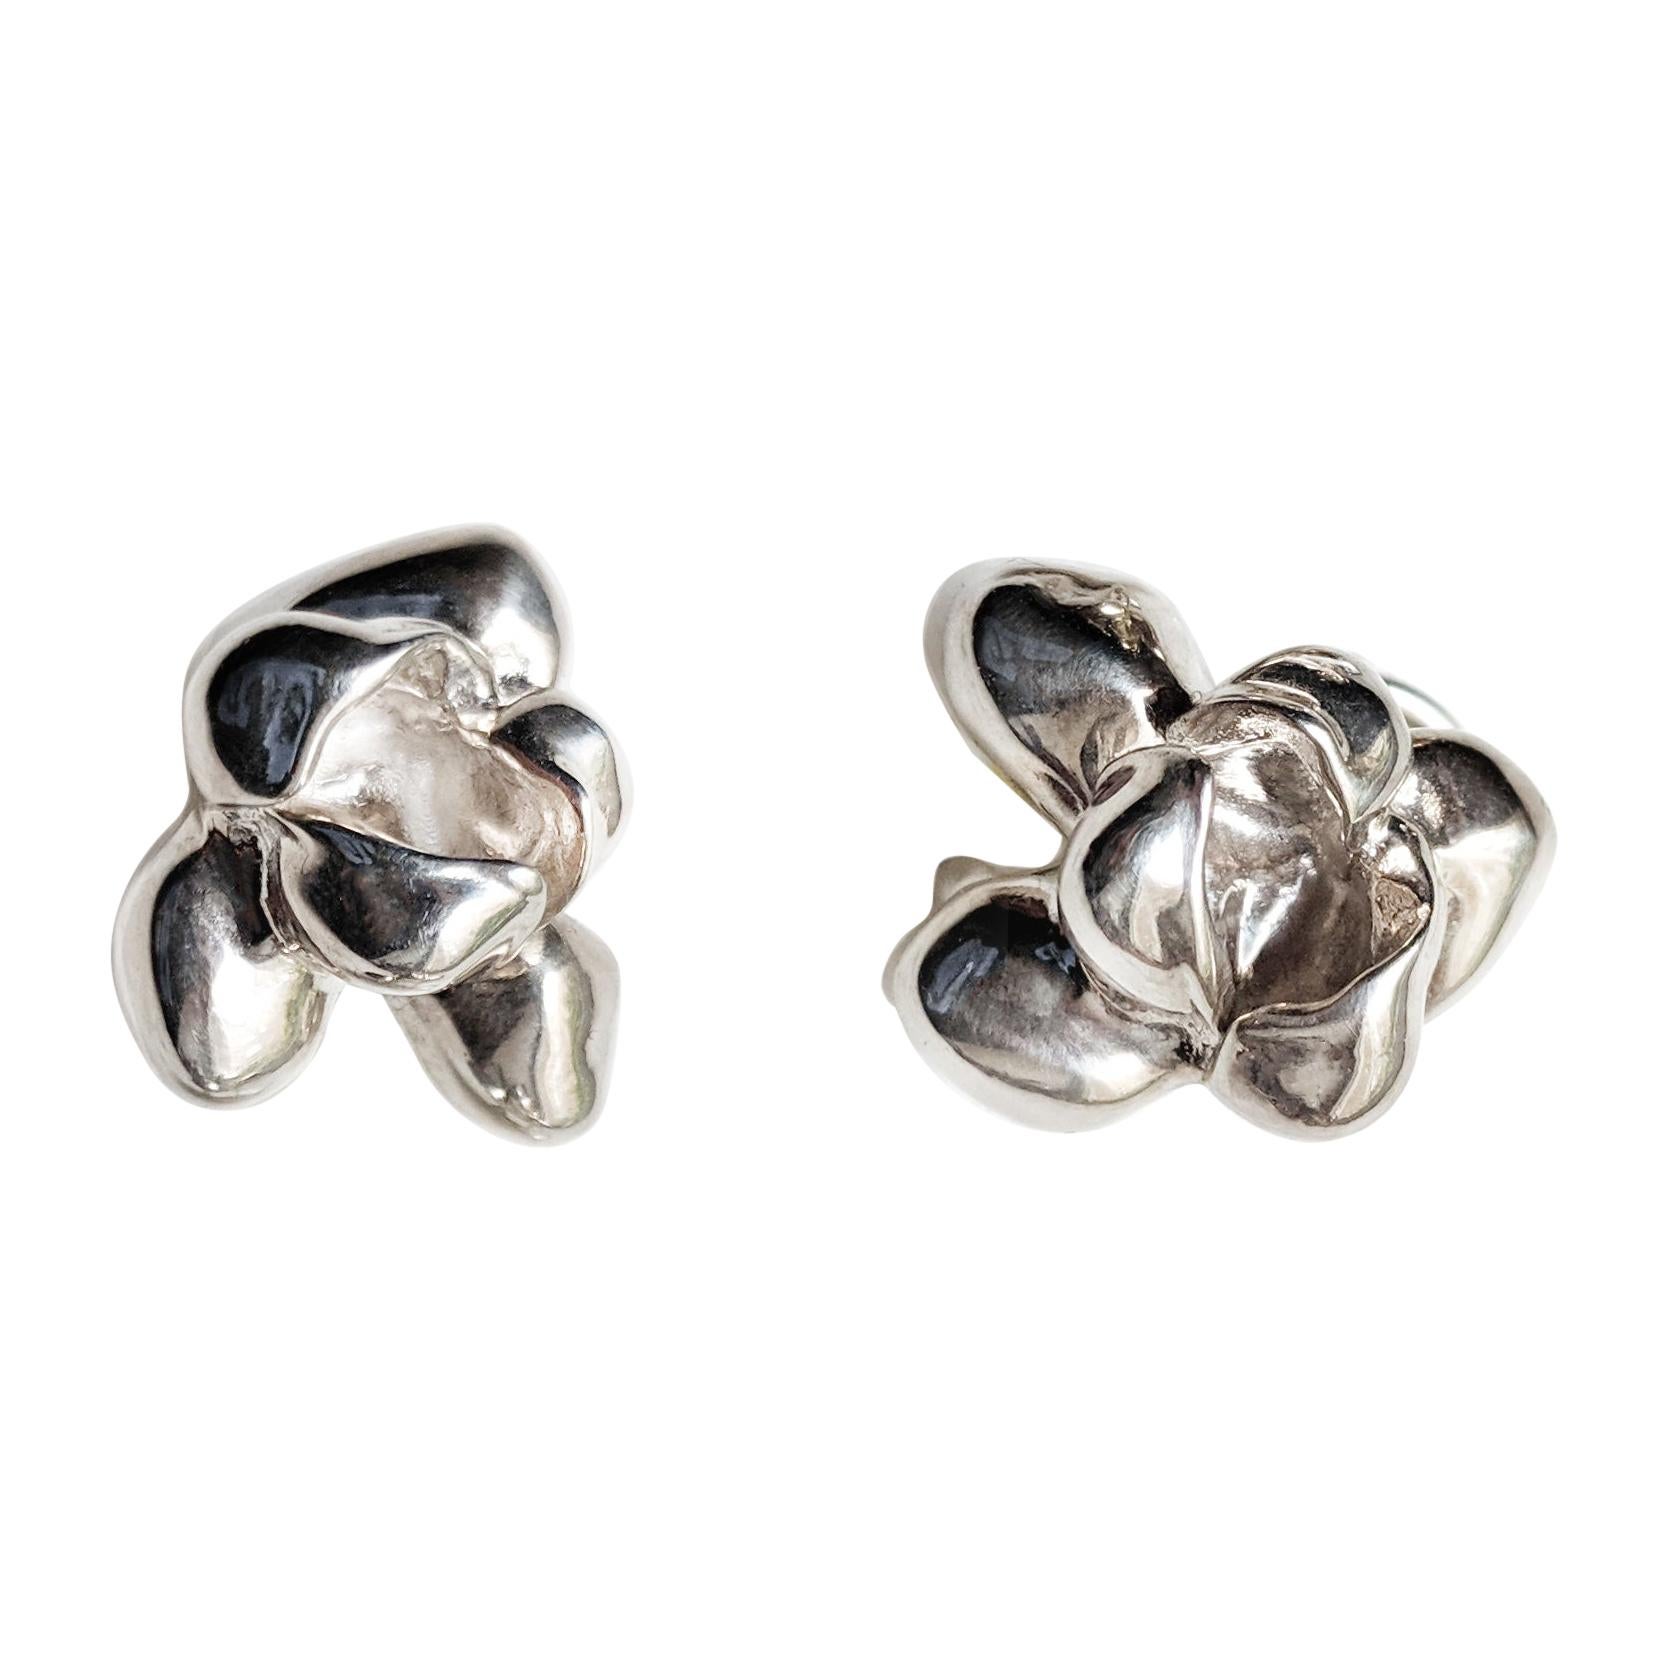 These Iris Blossom contemporary cocktail stud earrings are limited edition many-in-one transformer earrings. It was chosen for the stage outfit by the german actress Anne Ratte-Polle, when she was receiving the Bavarian Film award. The sculptural